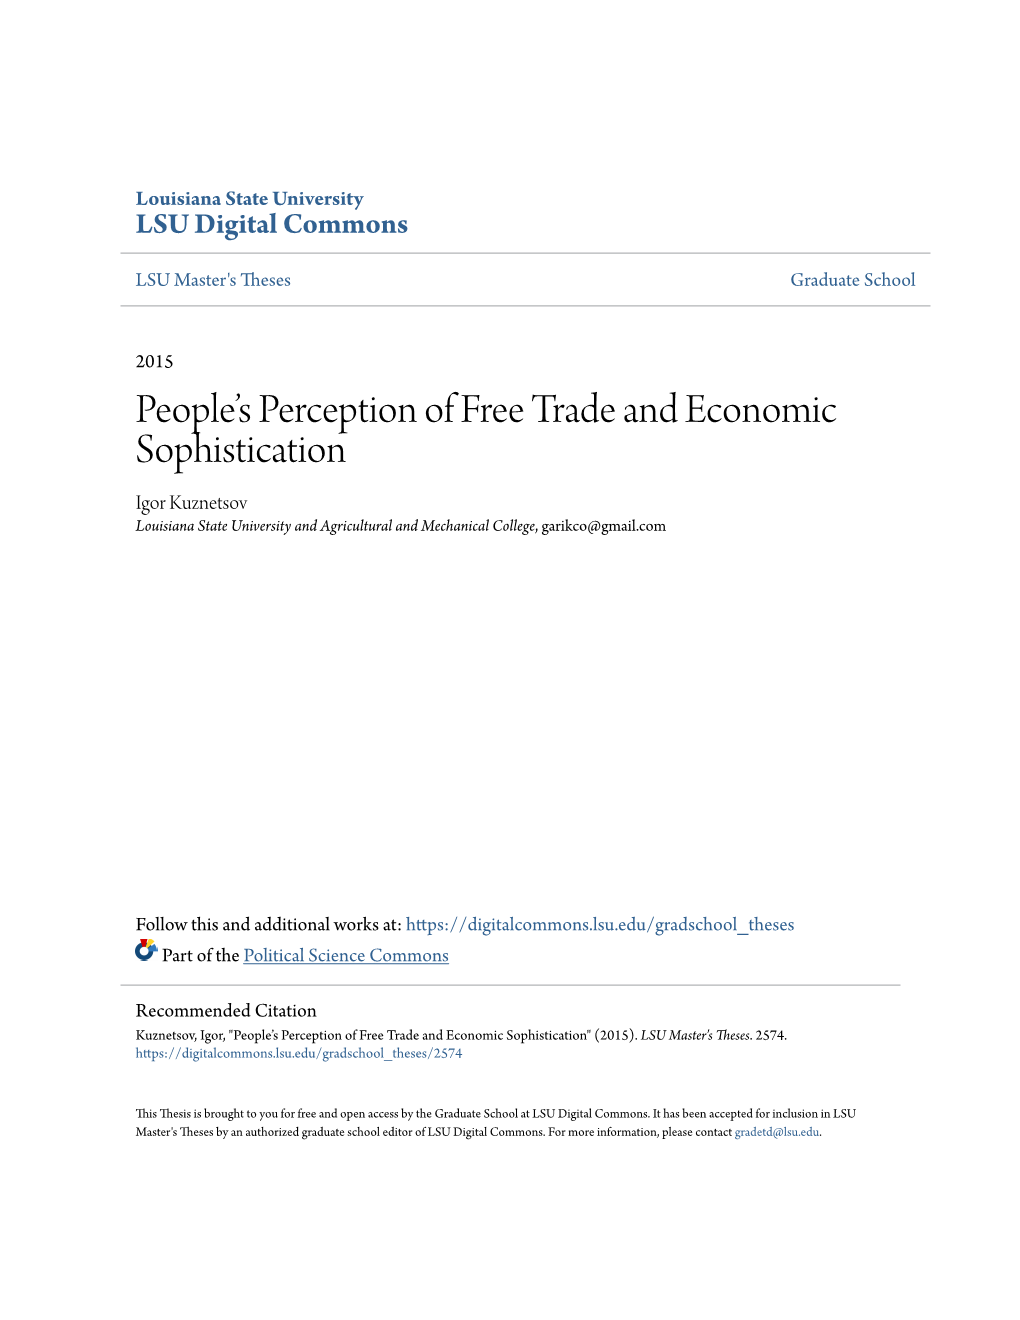 People's Perception of Free Trade and Economic Sophistication